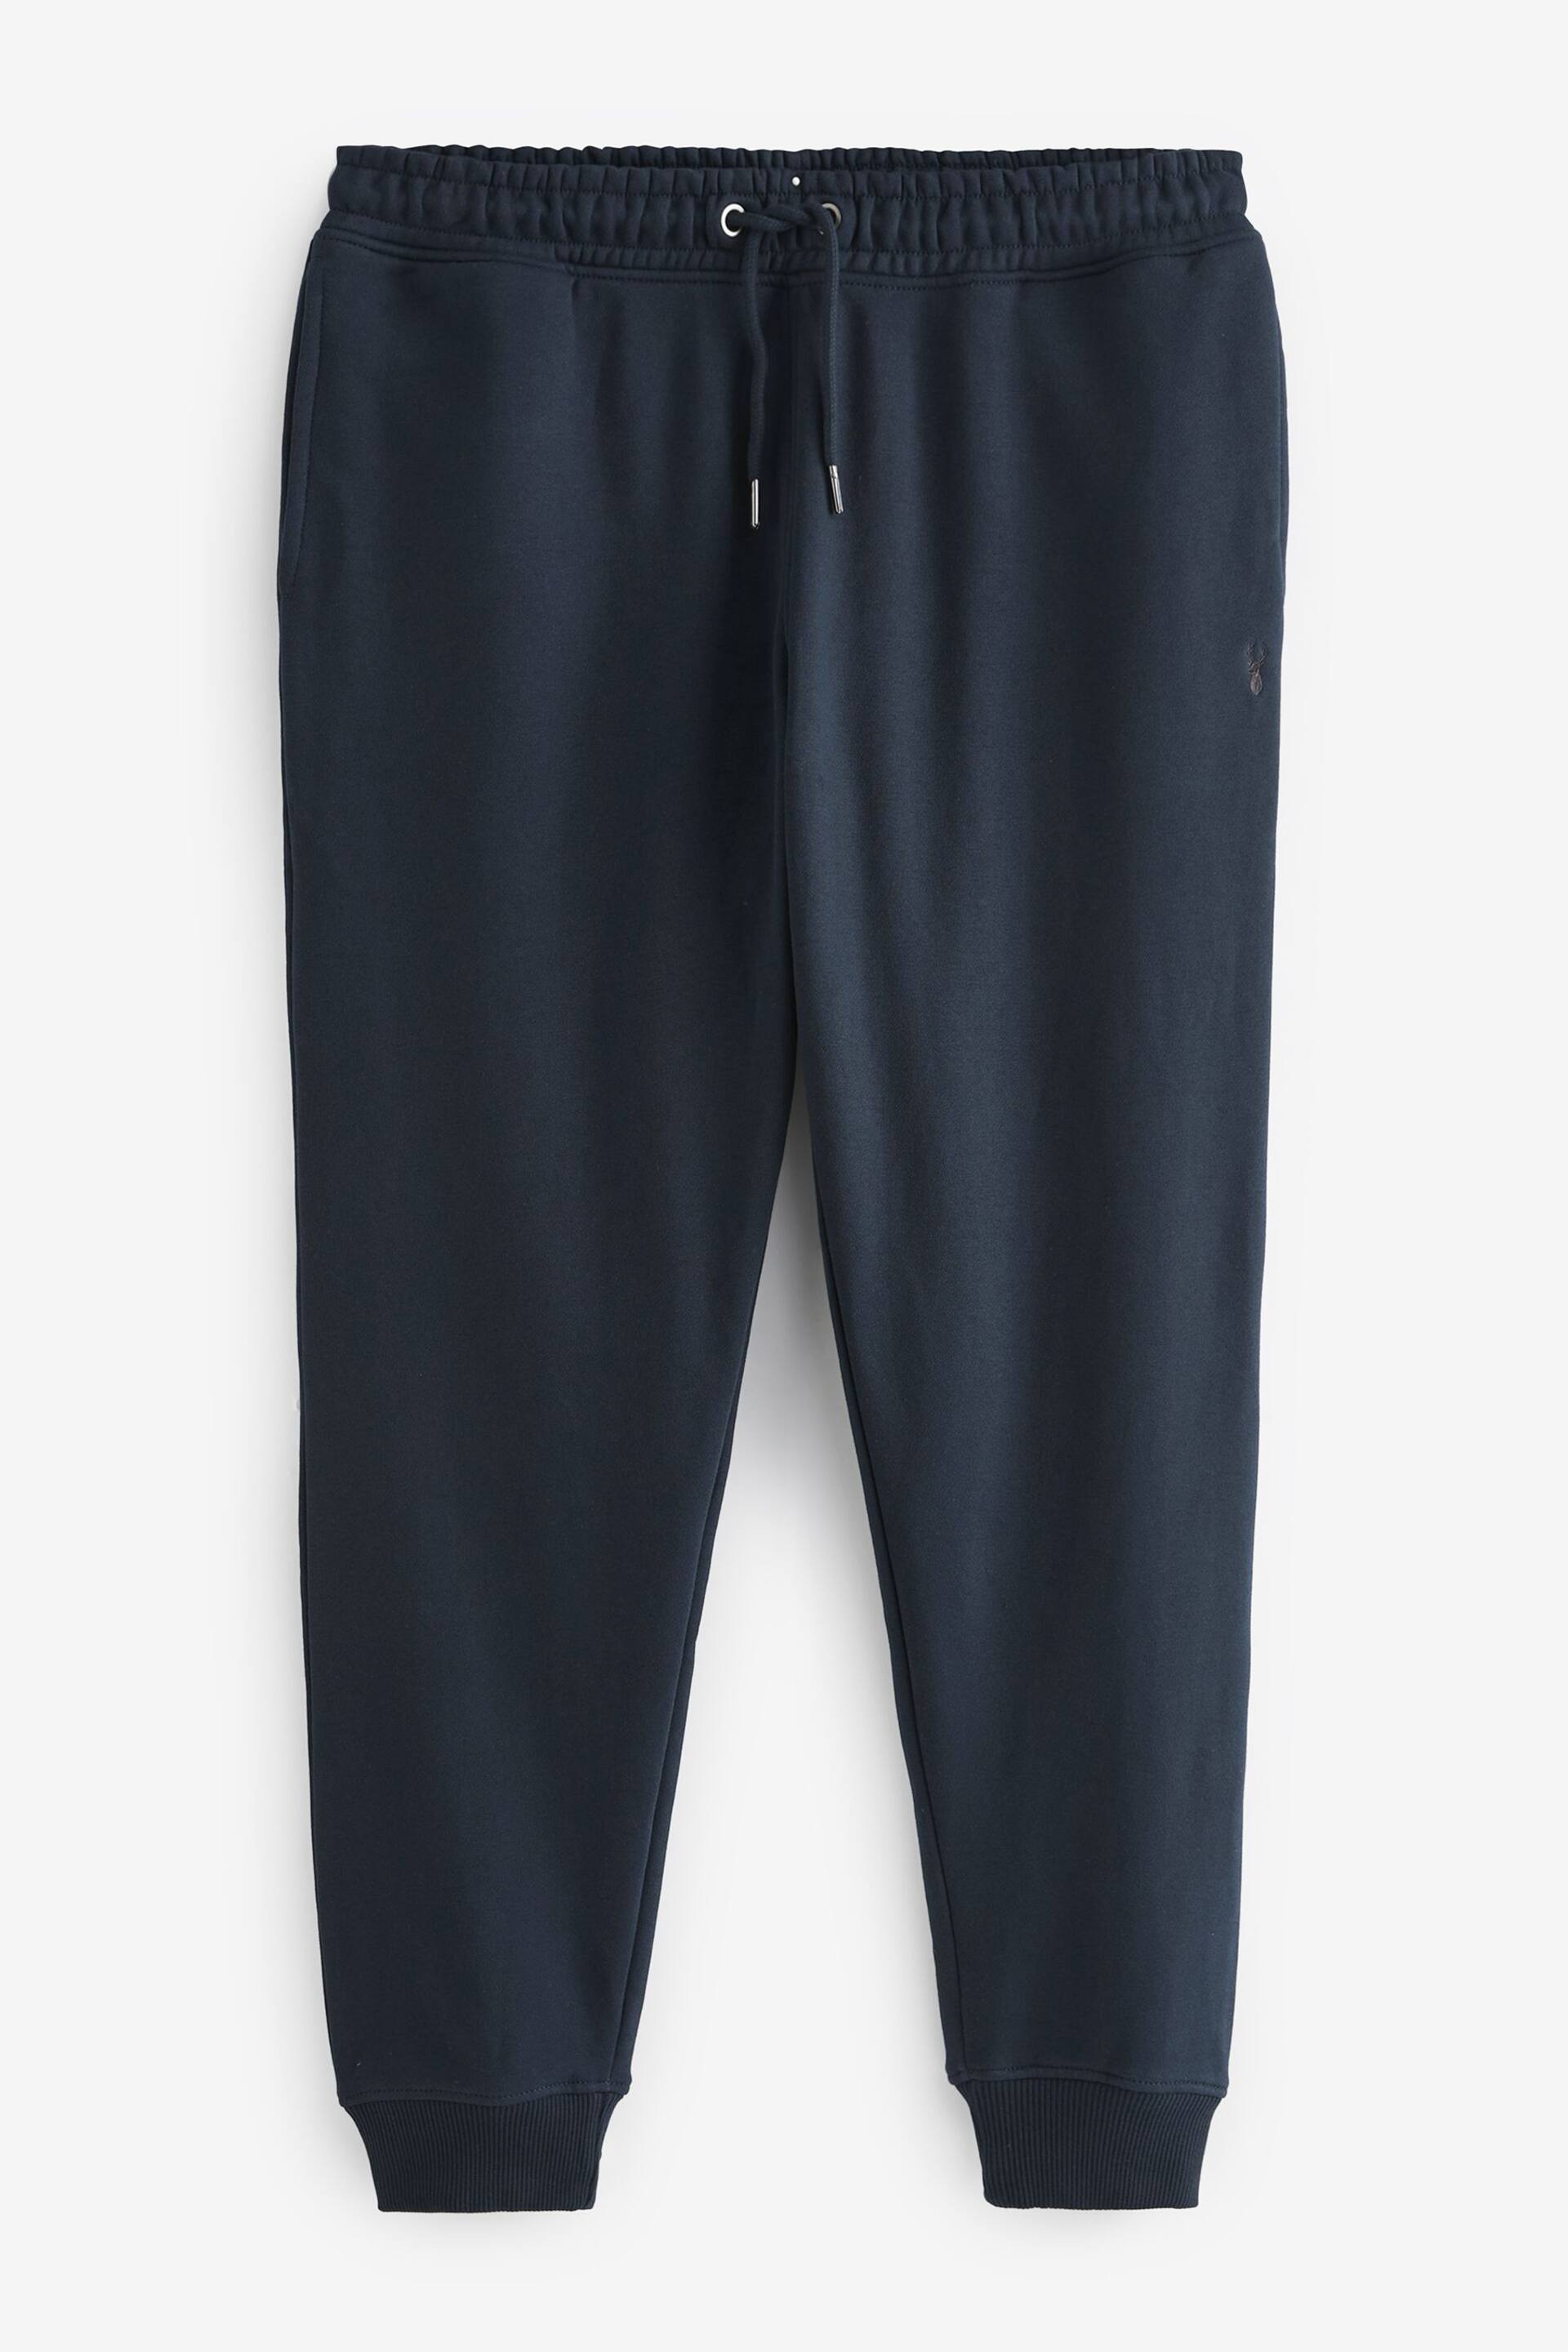 Navy Regular Fit Cotton Blend Cuffed Joggers - Image 5 of 7